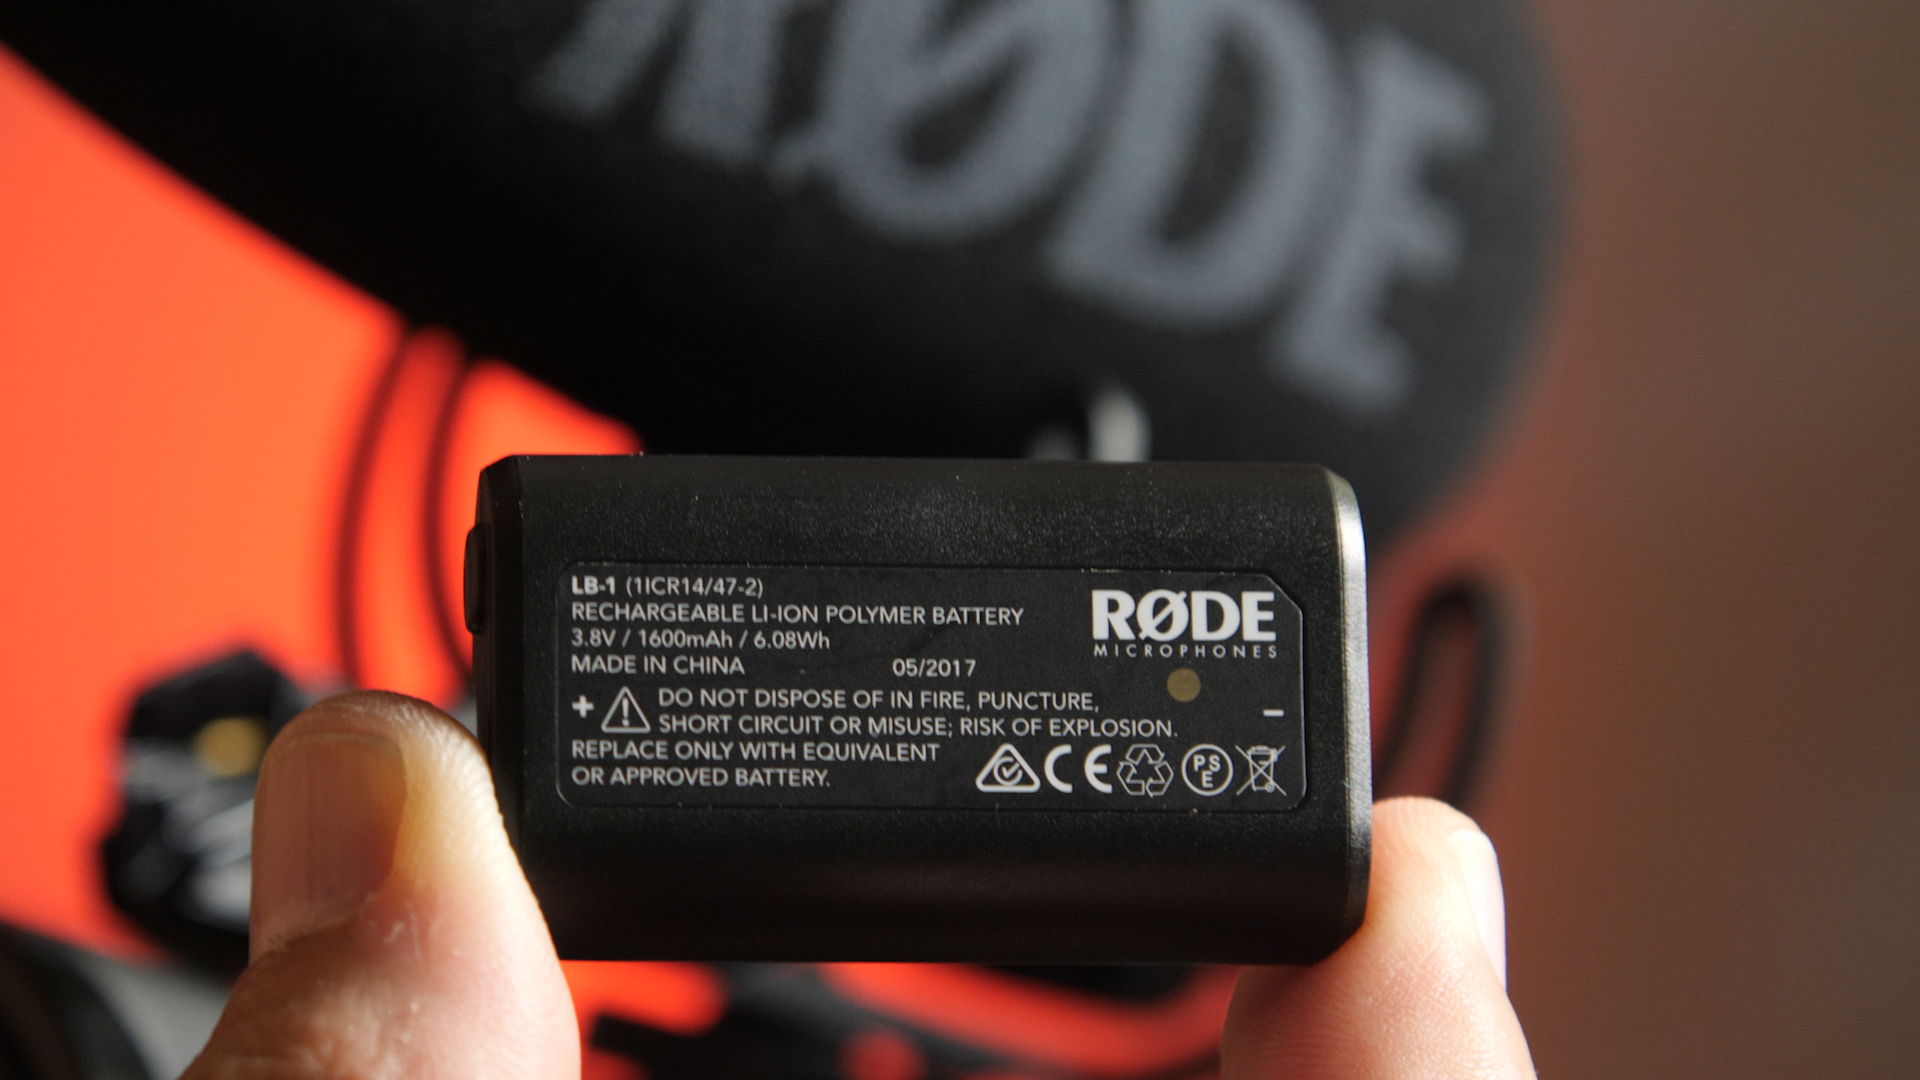 VideoMic it worth the upgrade? - Newsshooter